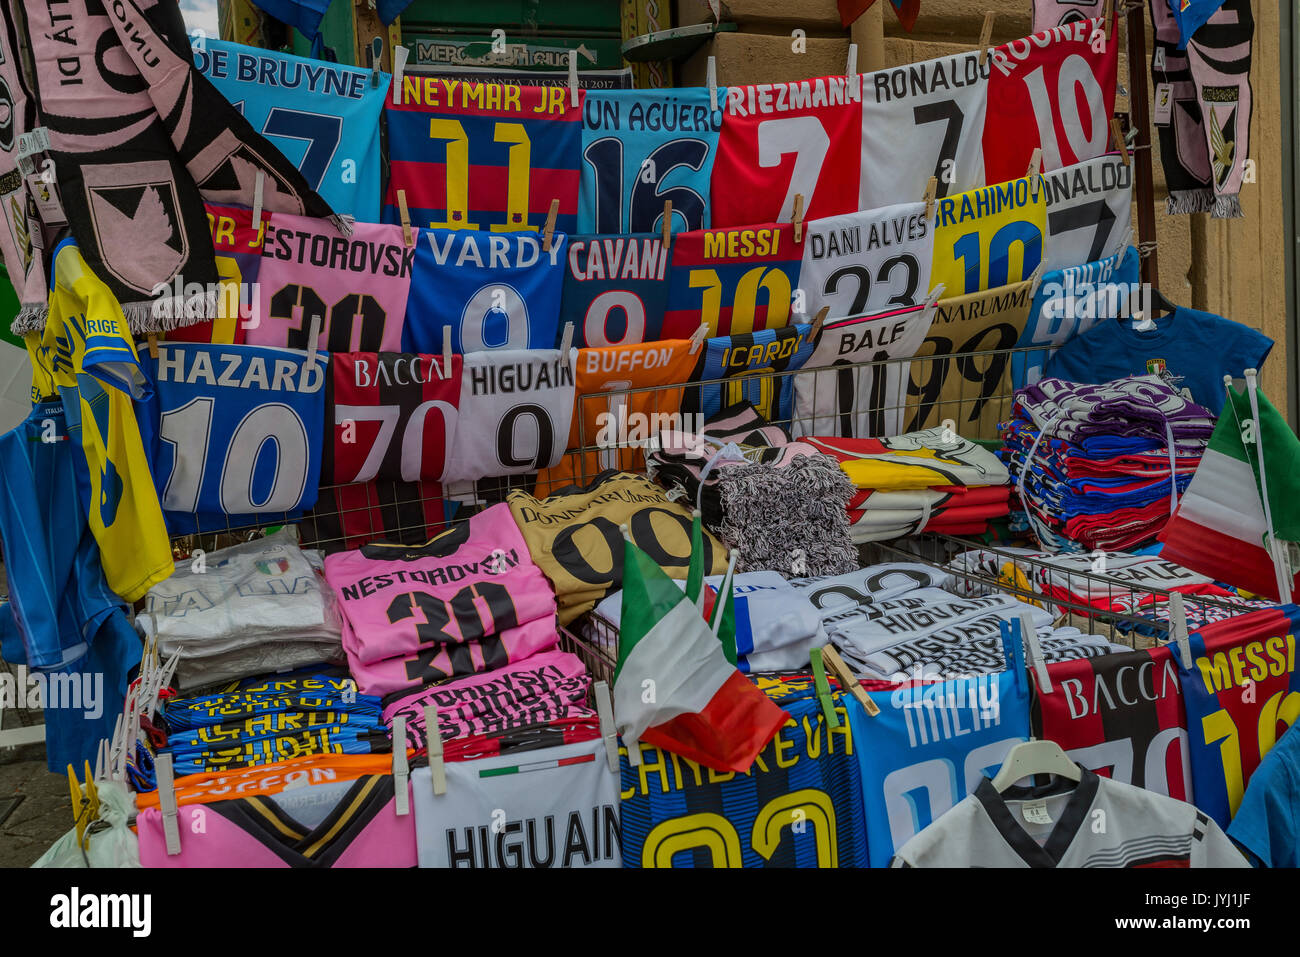 Palermo Football shirts at a market in Sicily Stock Photo - Alamy